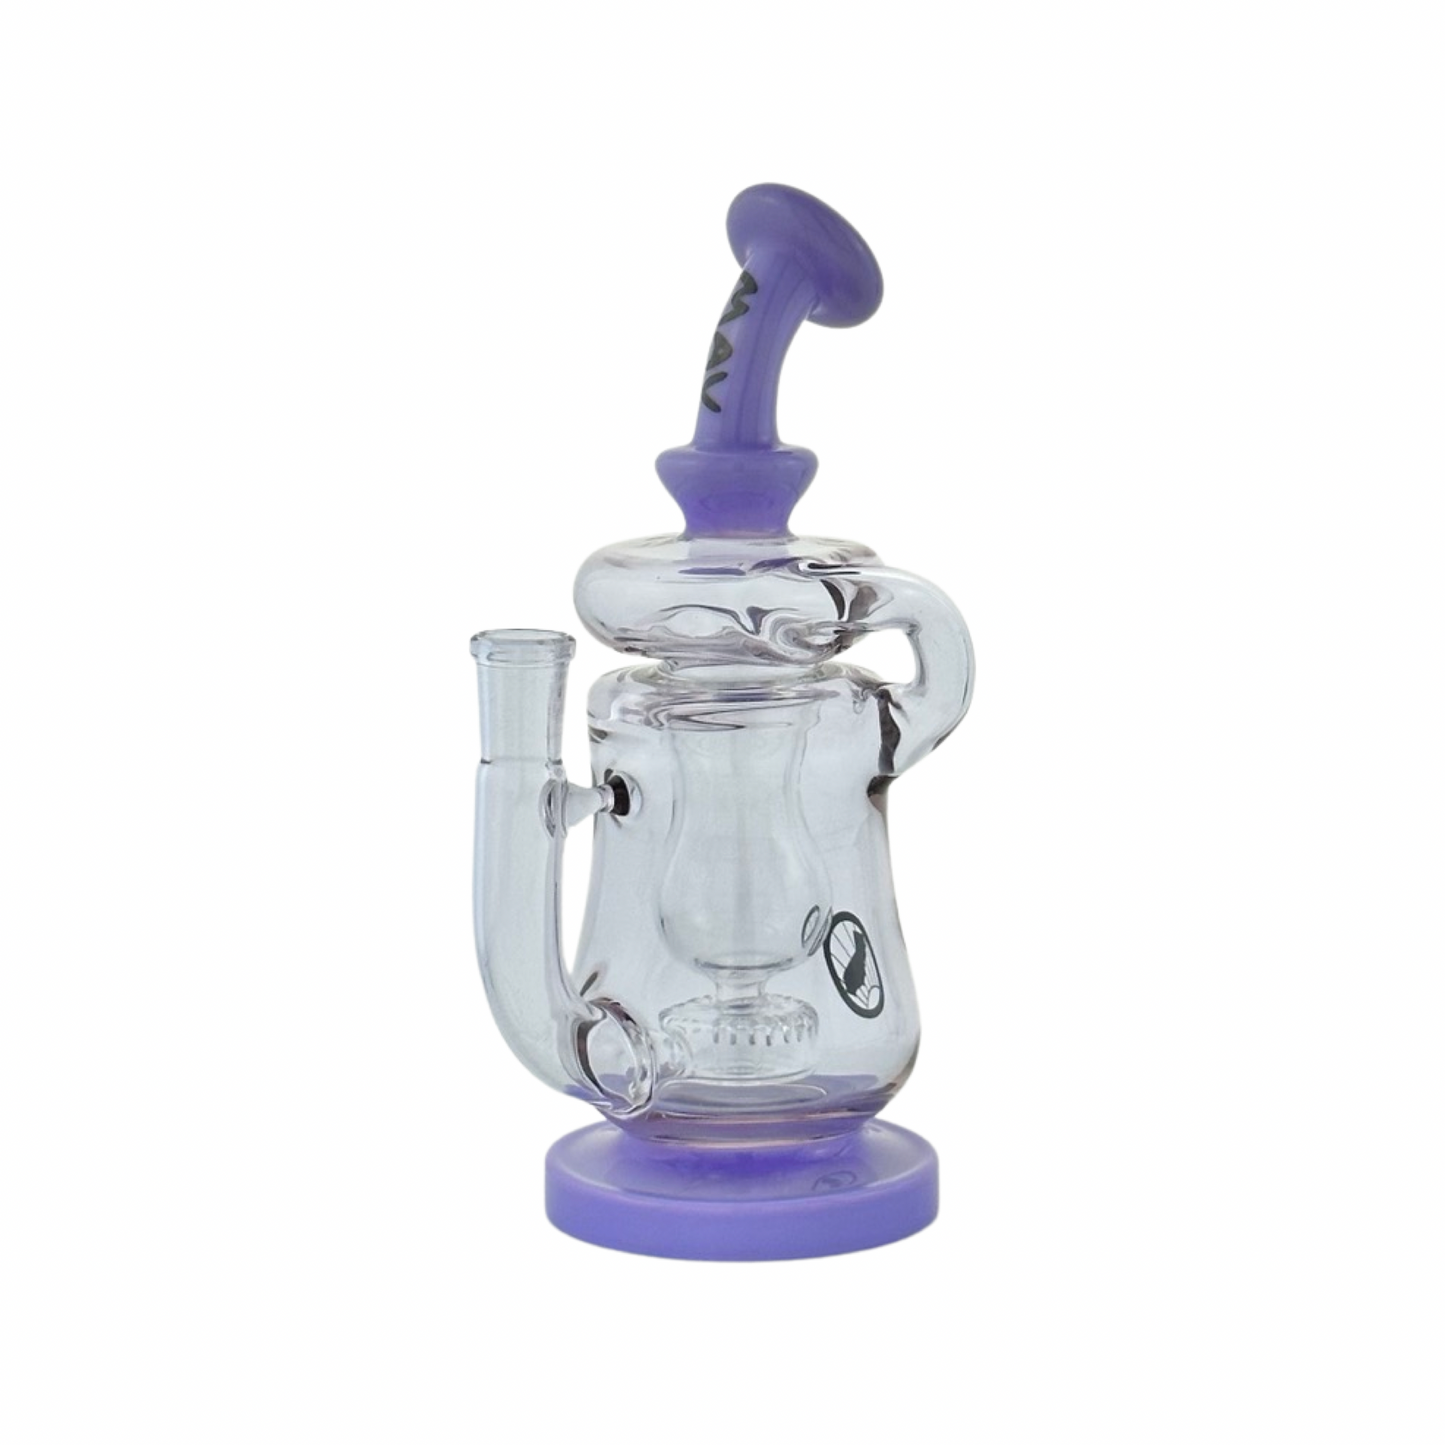 Lido Recycler Full Color